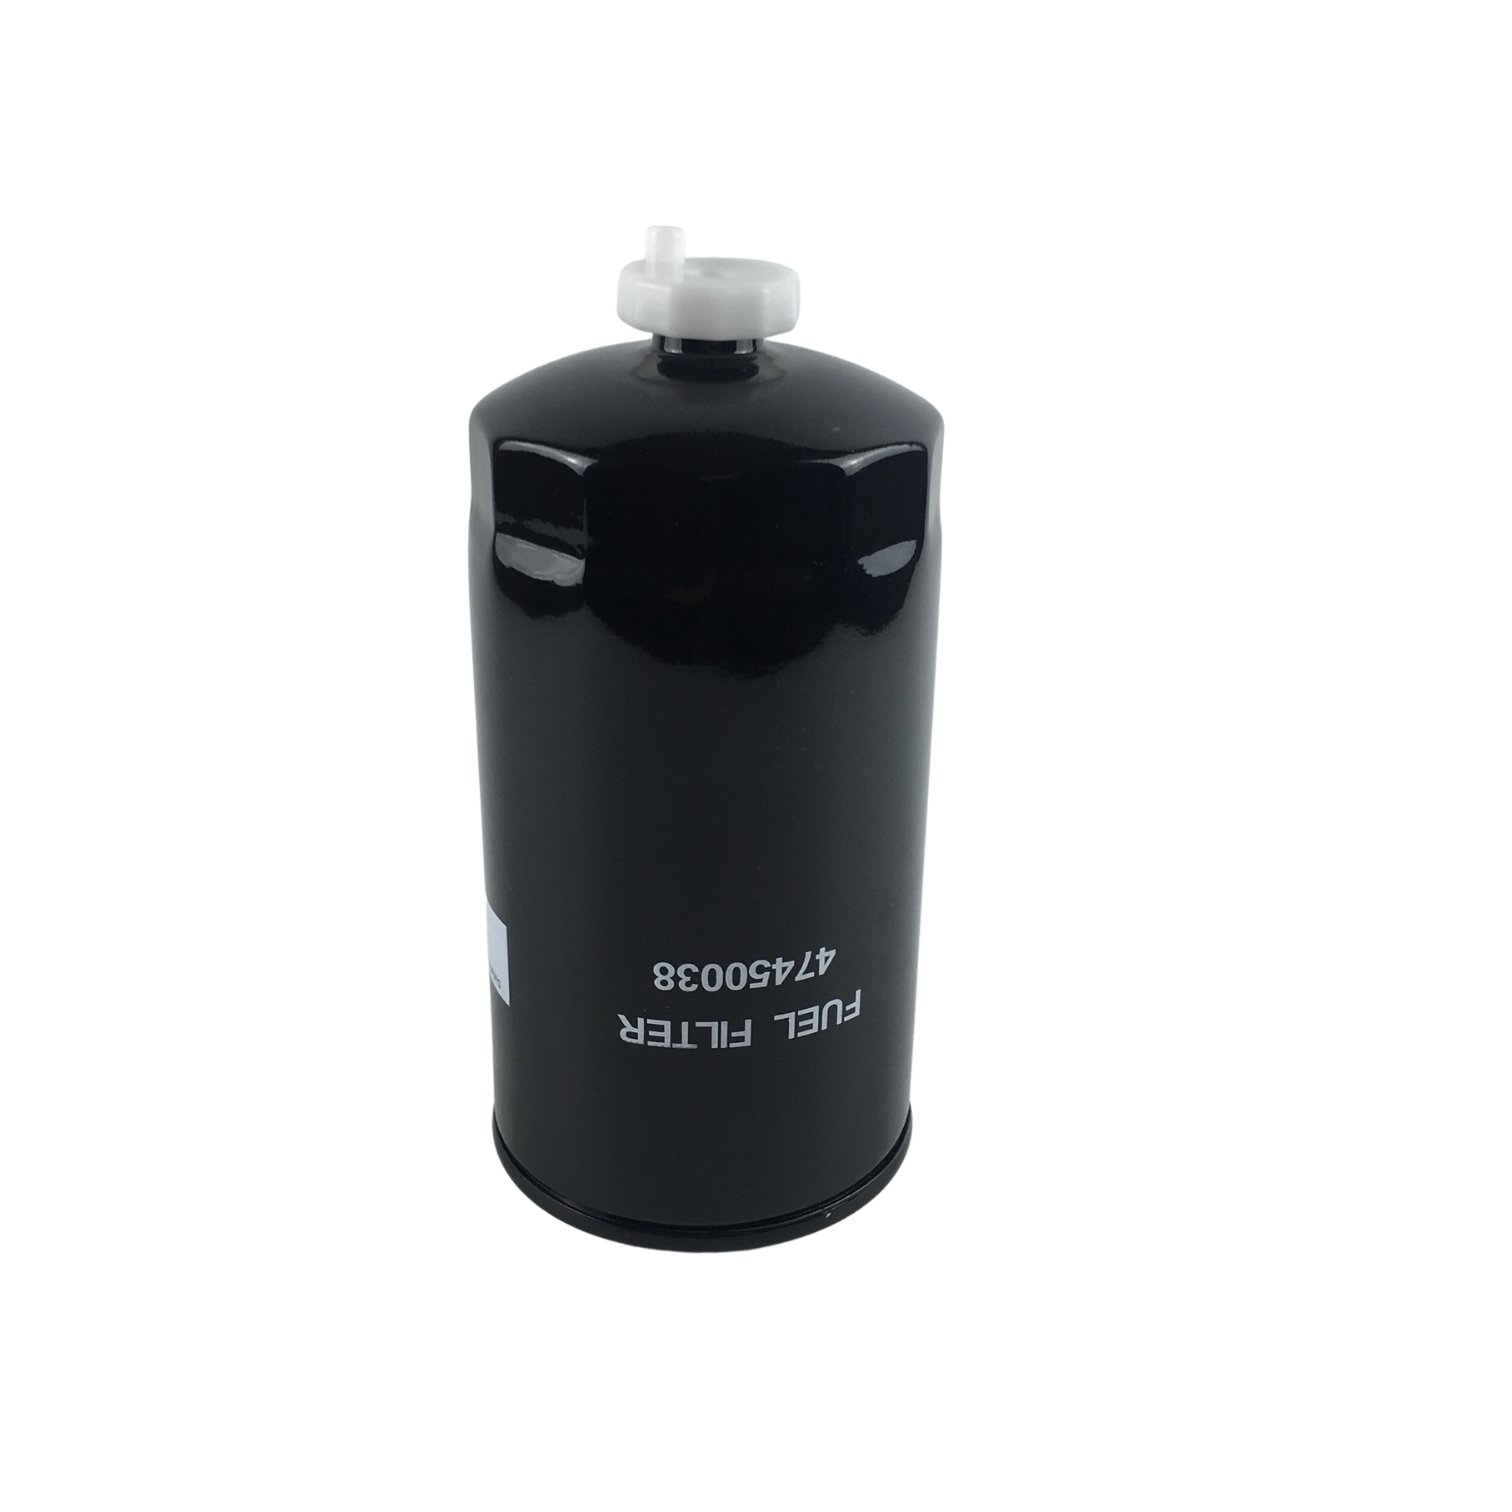 Fuel Filter Reference: S 47450038 FIL Suitable For Agricultural Machinery